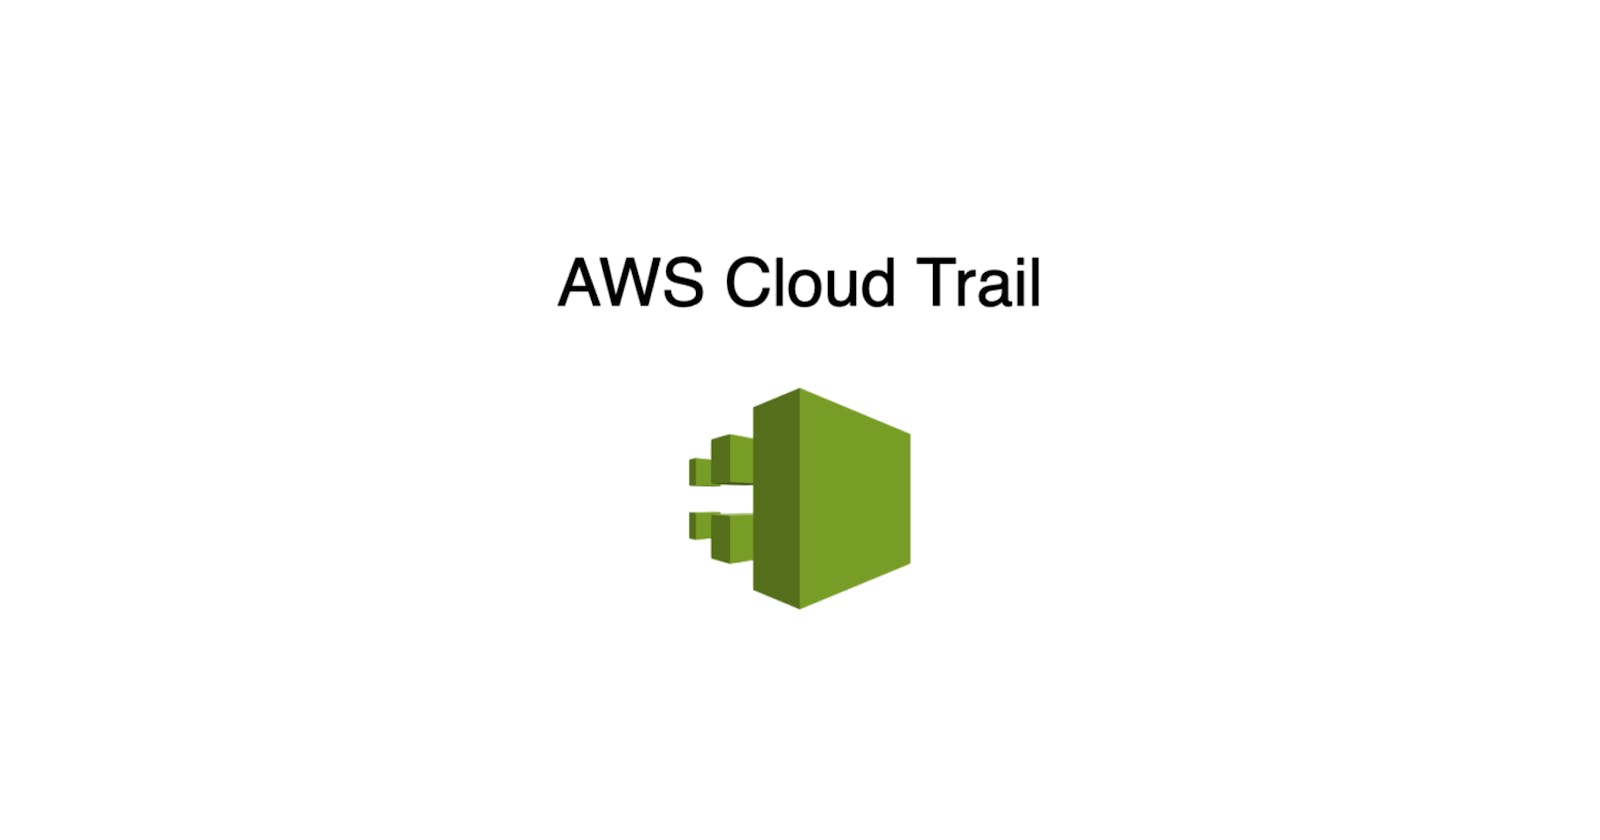 Basics of AWS IAM: How to set up a Cloud Trail in your organization?